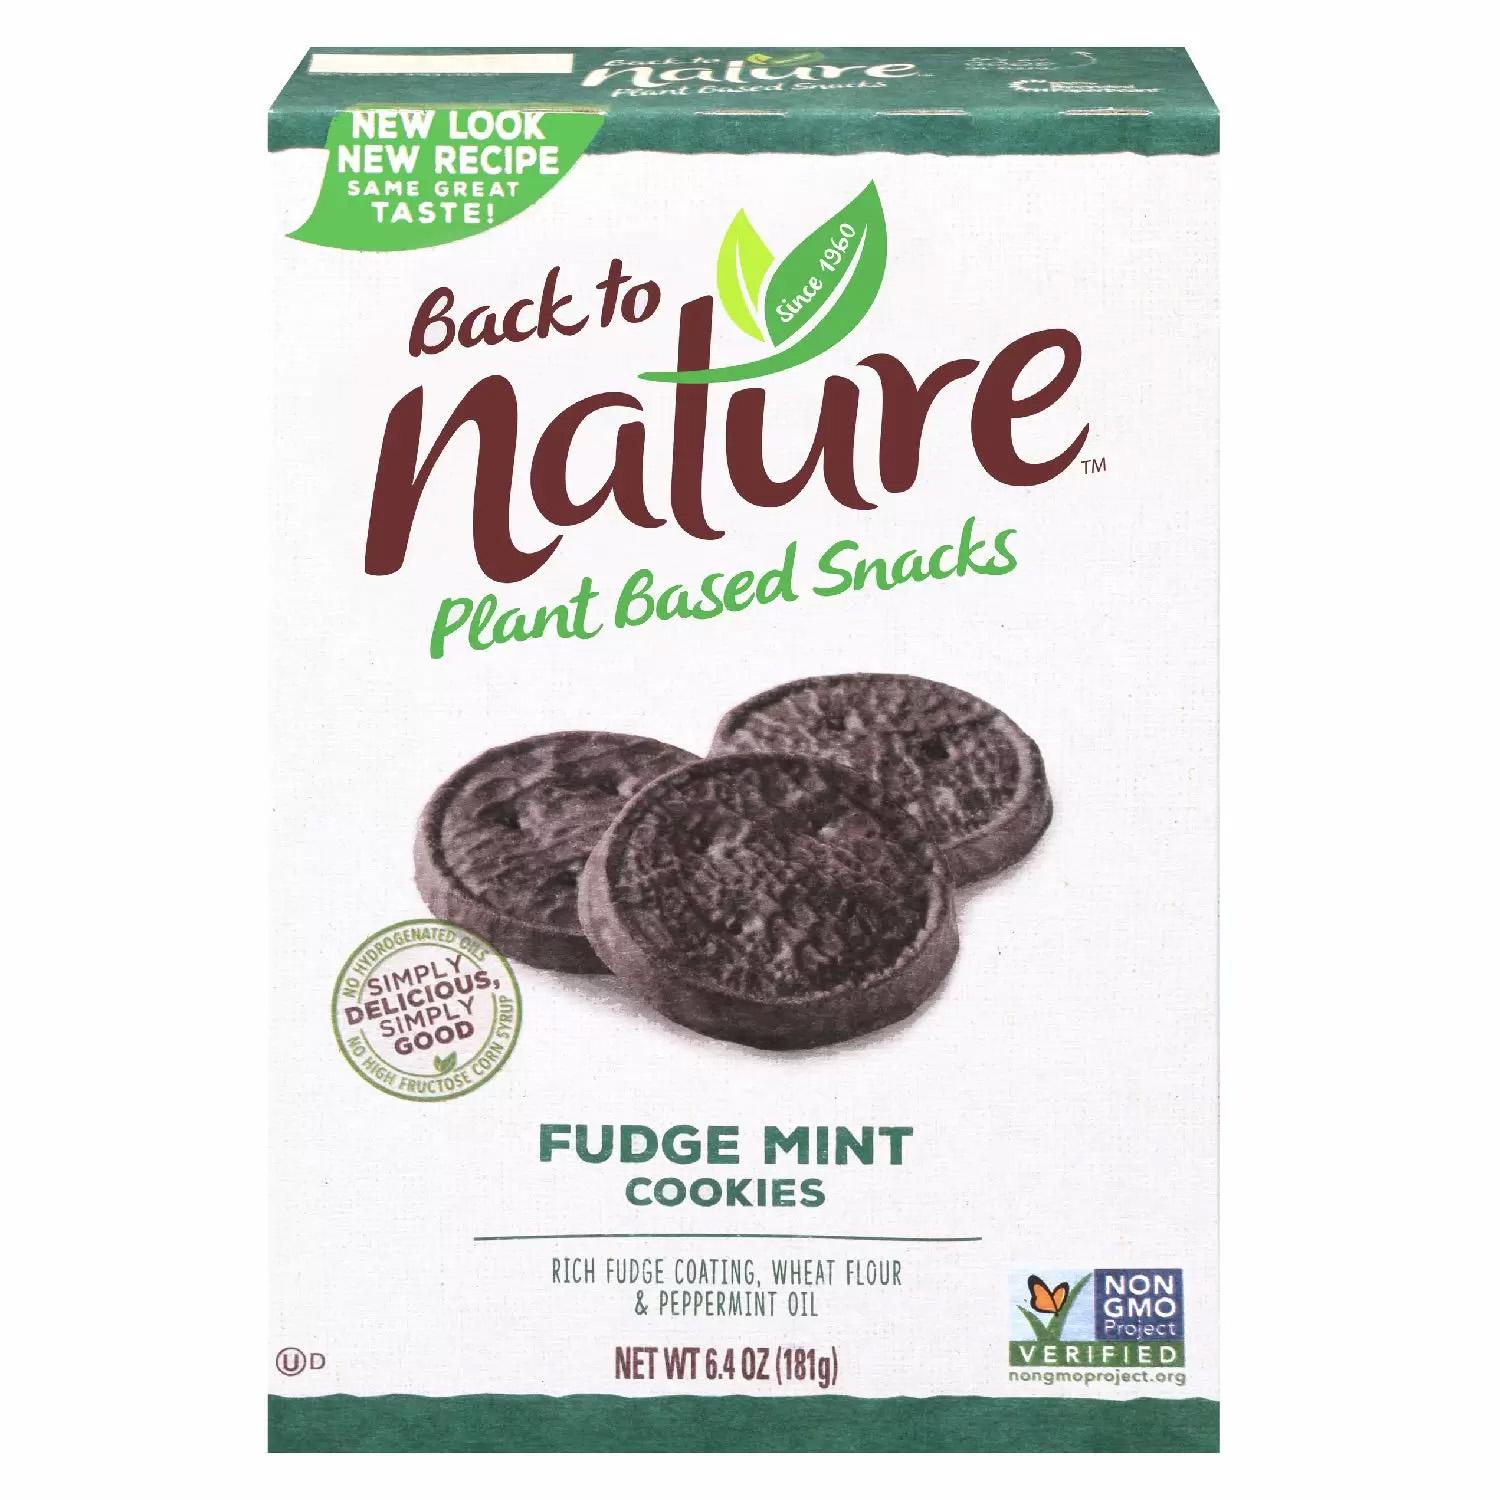 Back to Nature Fudge Mint Cookies for $2.79